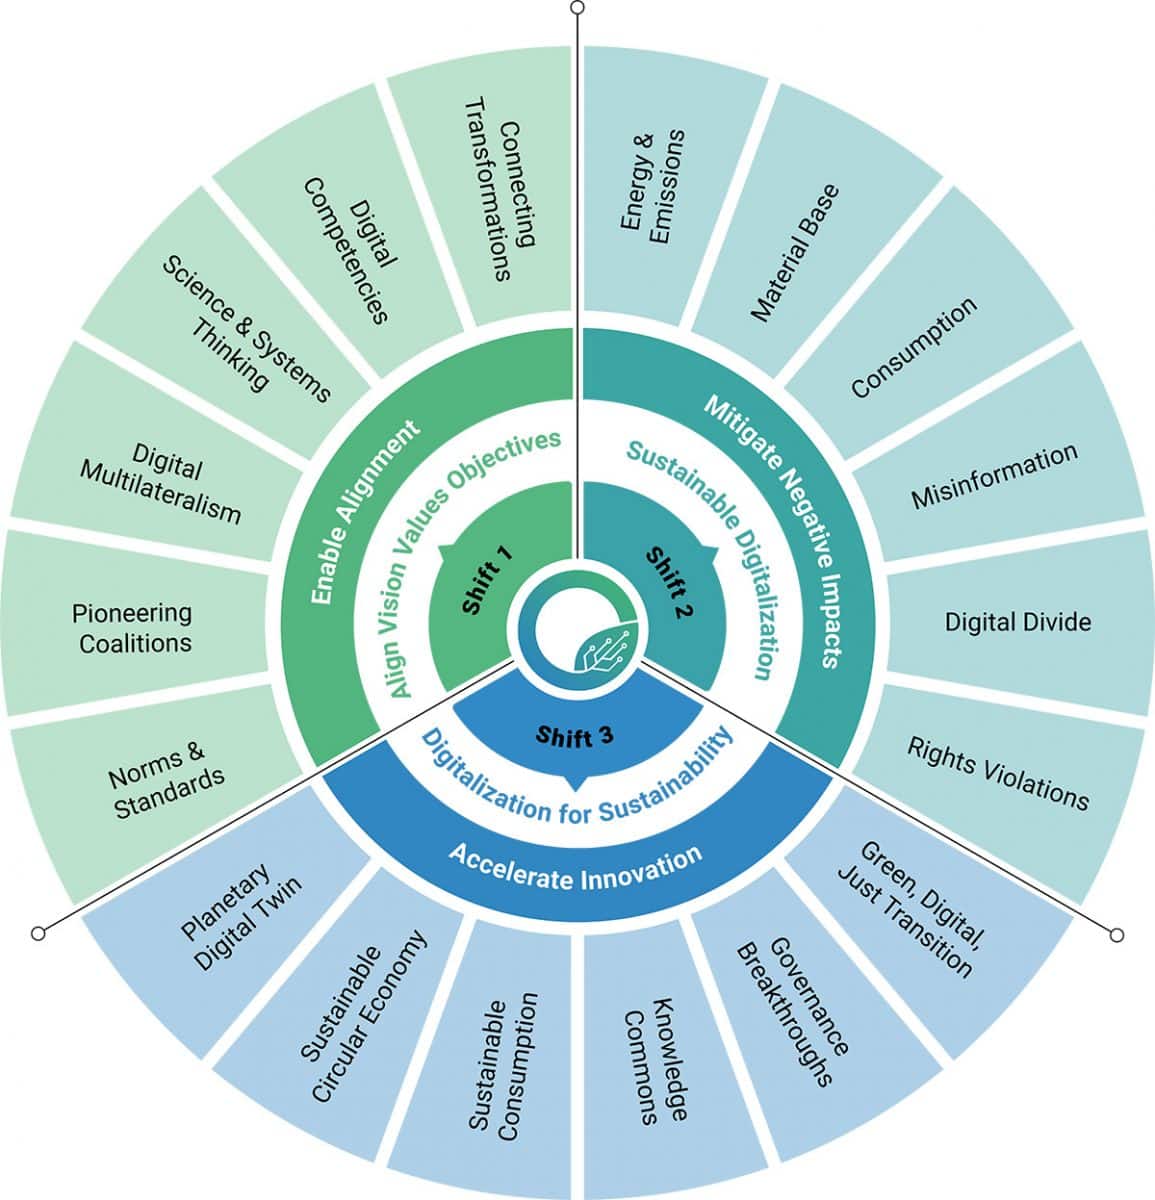 Graphic illustrating the CODES Three Shifts and 18 Strategic Priorities to Achieve a Sustainable Planet in the Digital Age. Info in image written in accompanying text.